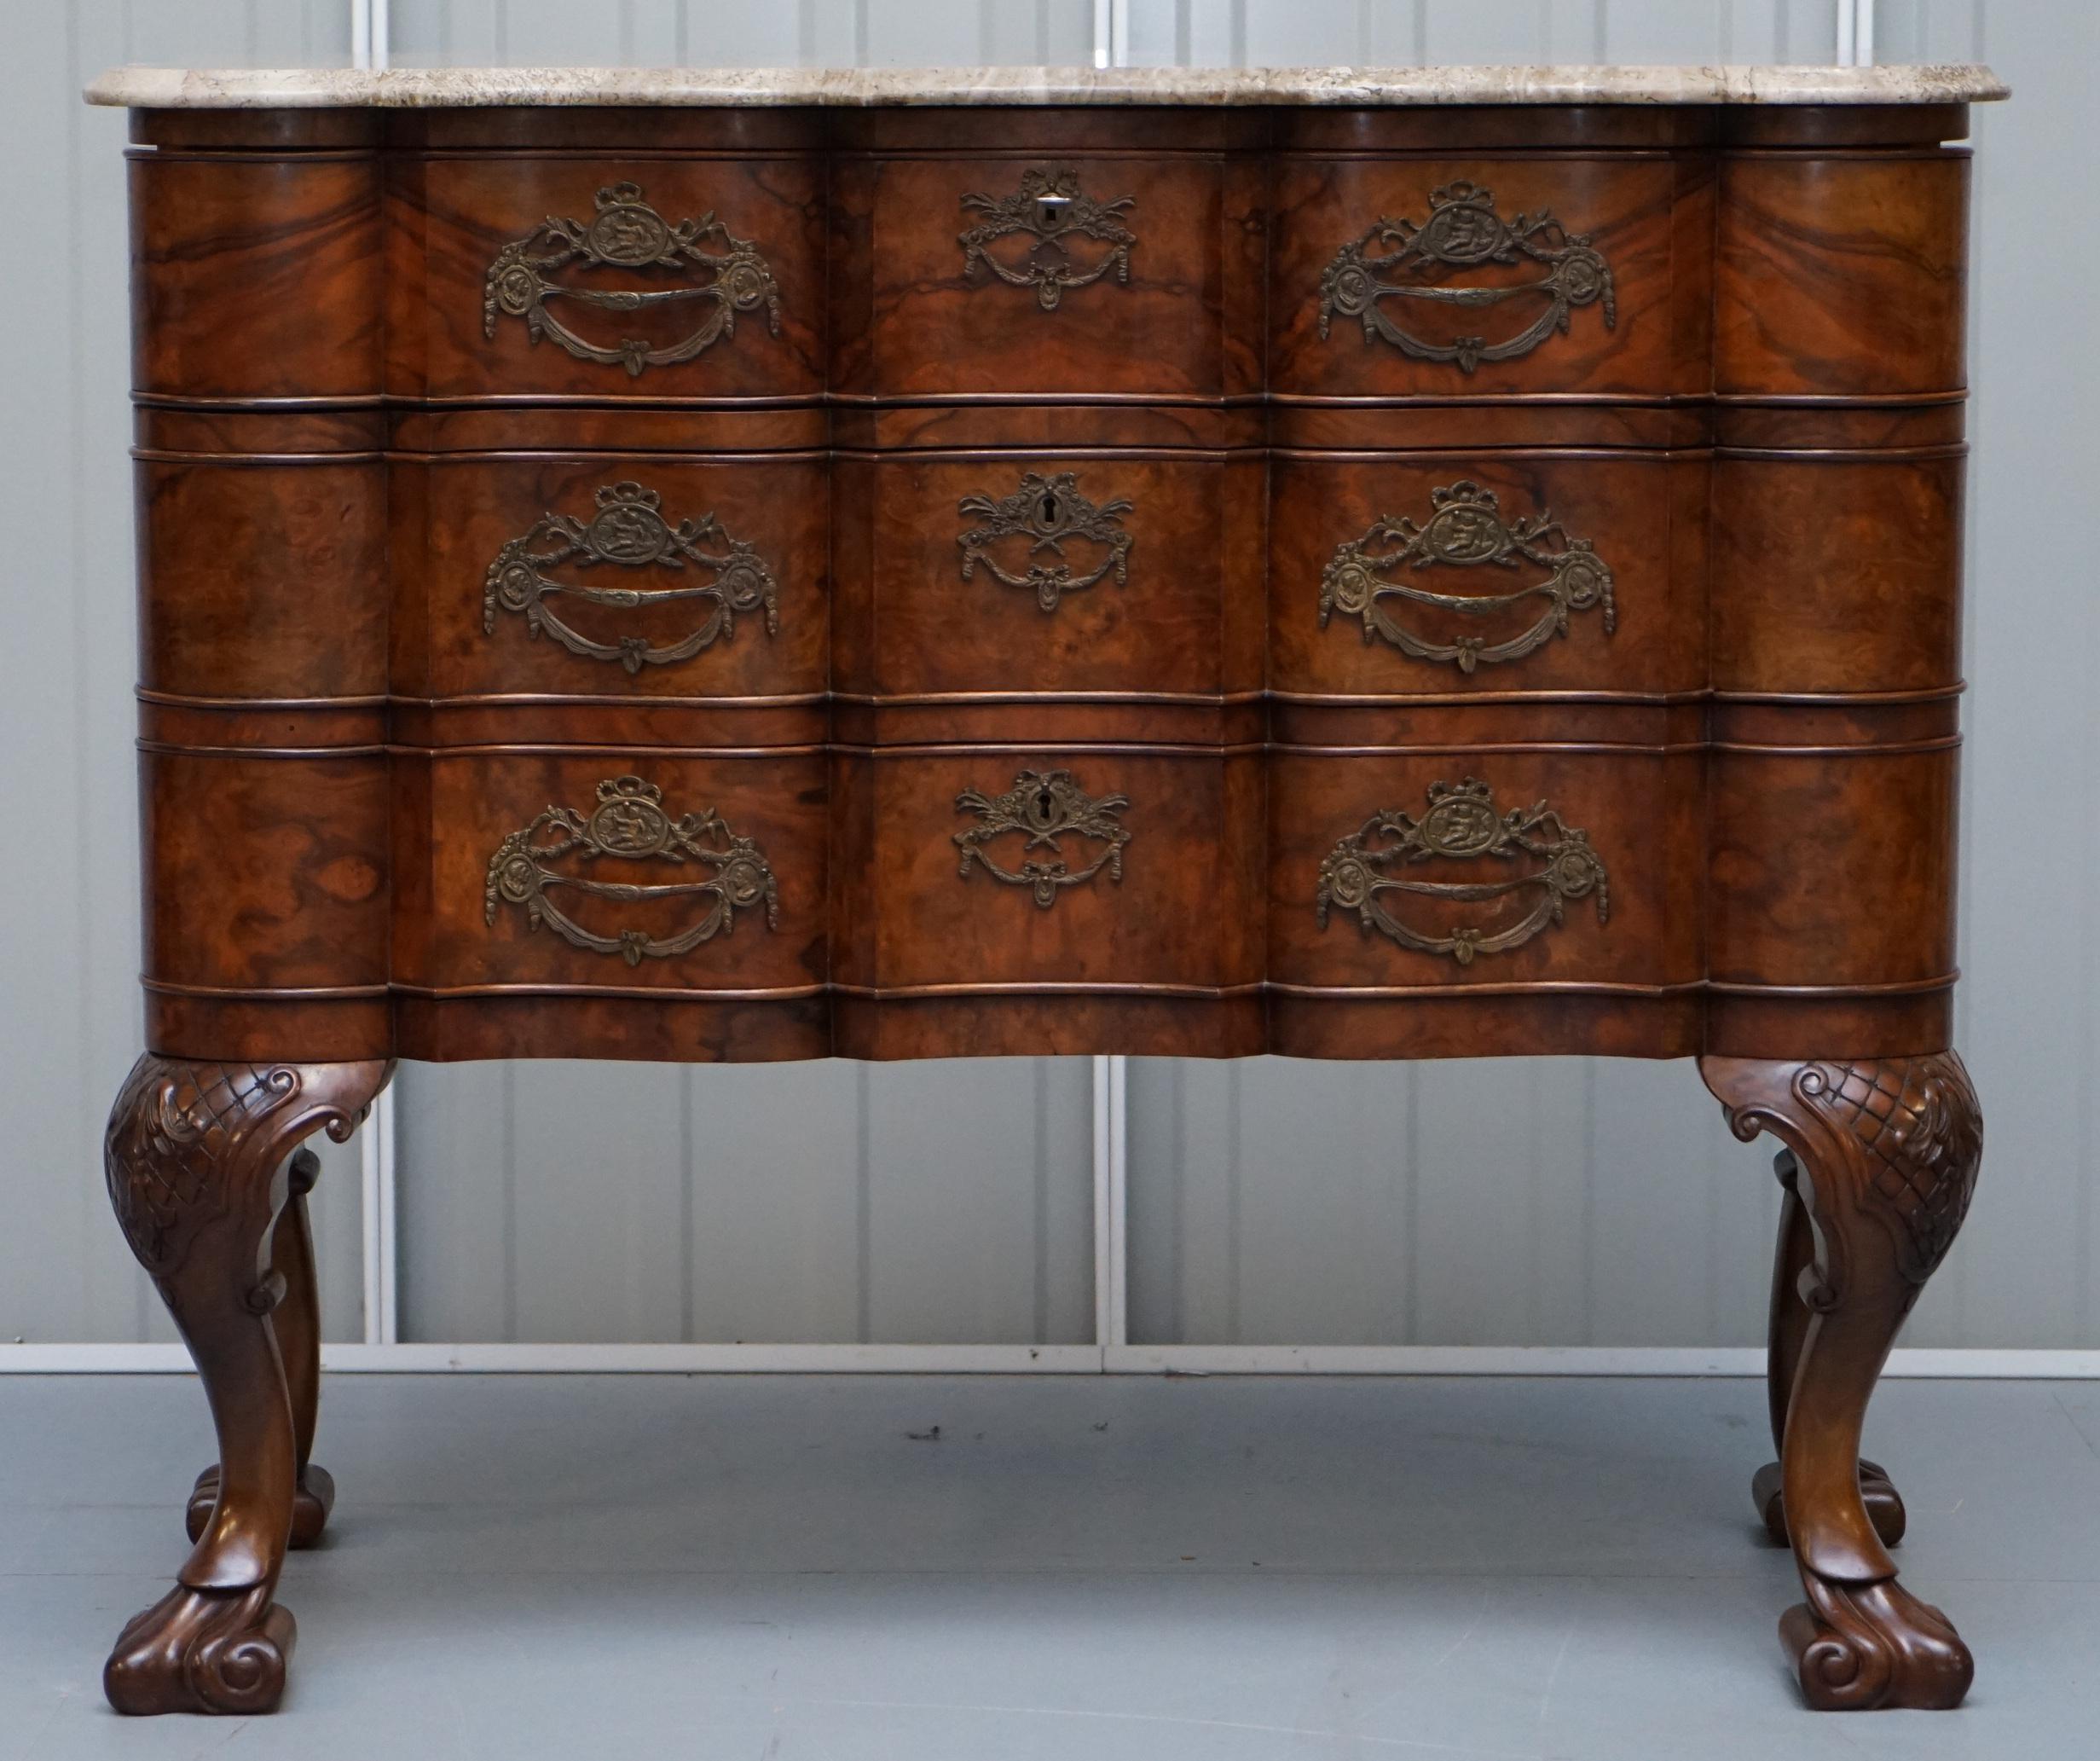 We are delighted to offer for sale this stunning and exceptionally rare serpentine fronted 19th century walnut chest of drawers commode with marble after Thomas Chippendale

A very good looking well made and decorative chest. The front is